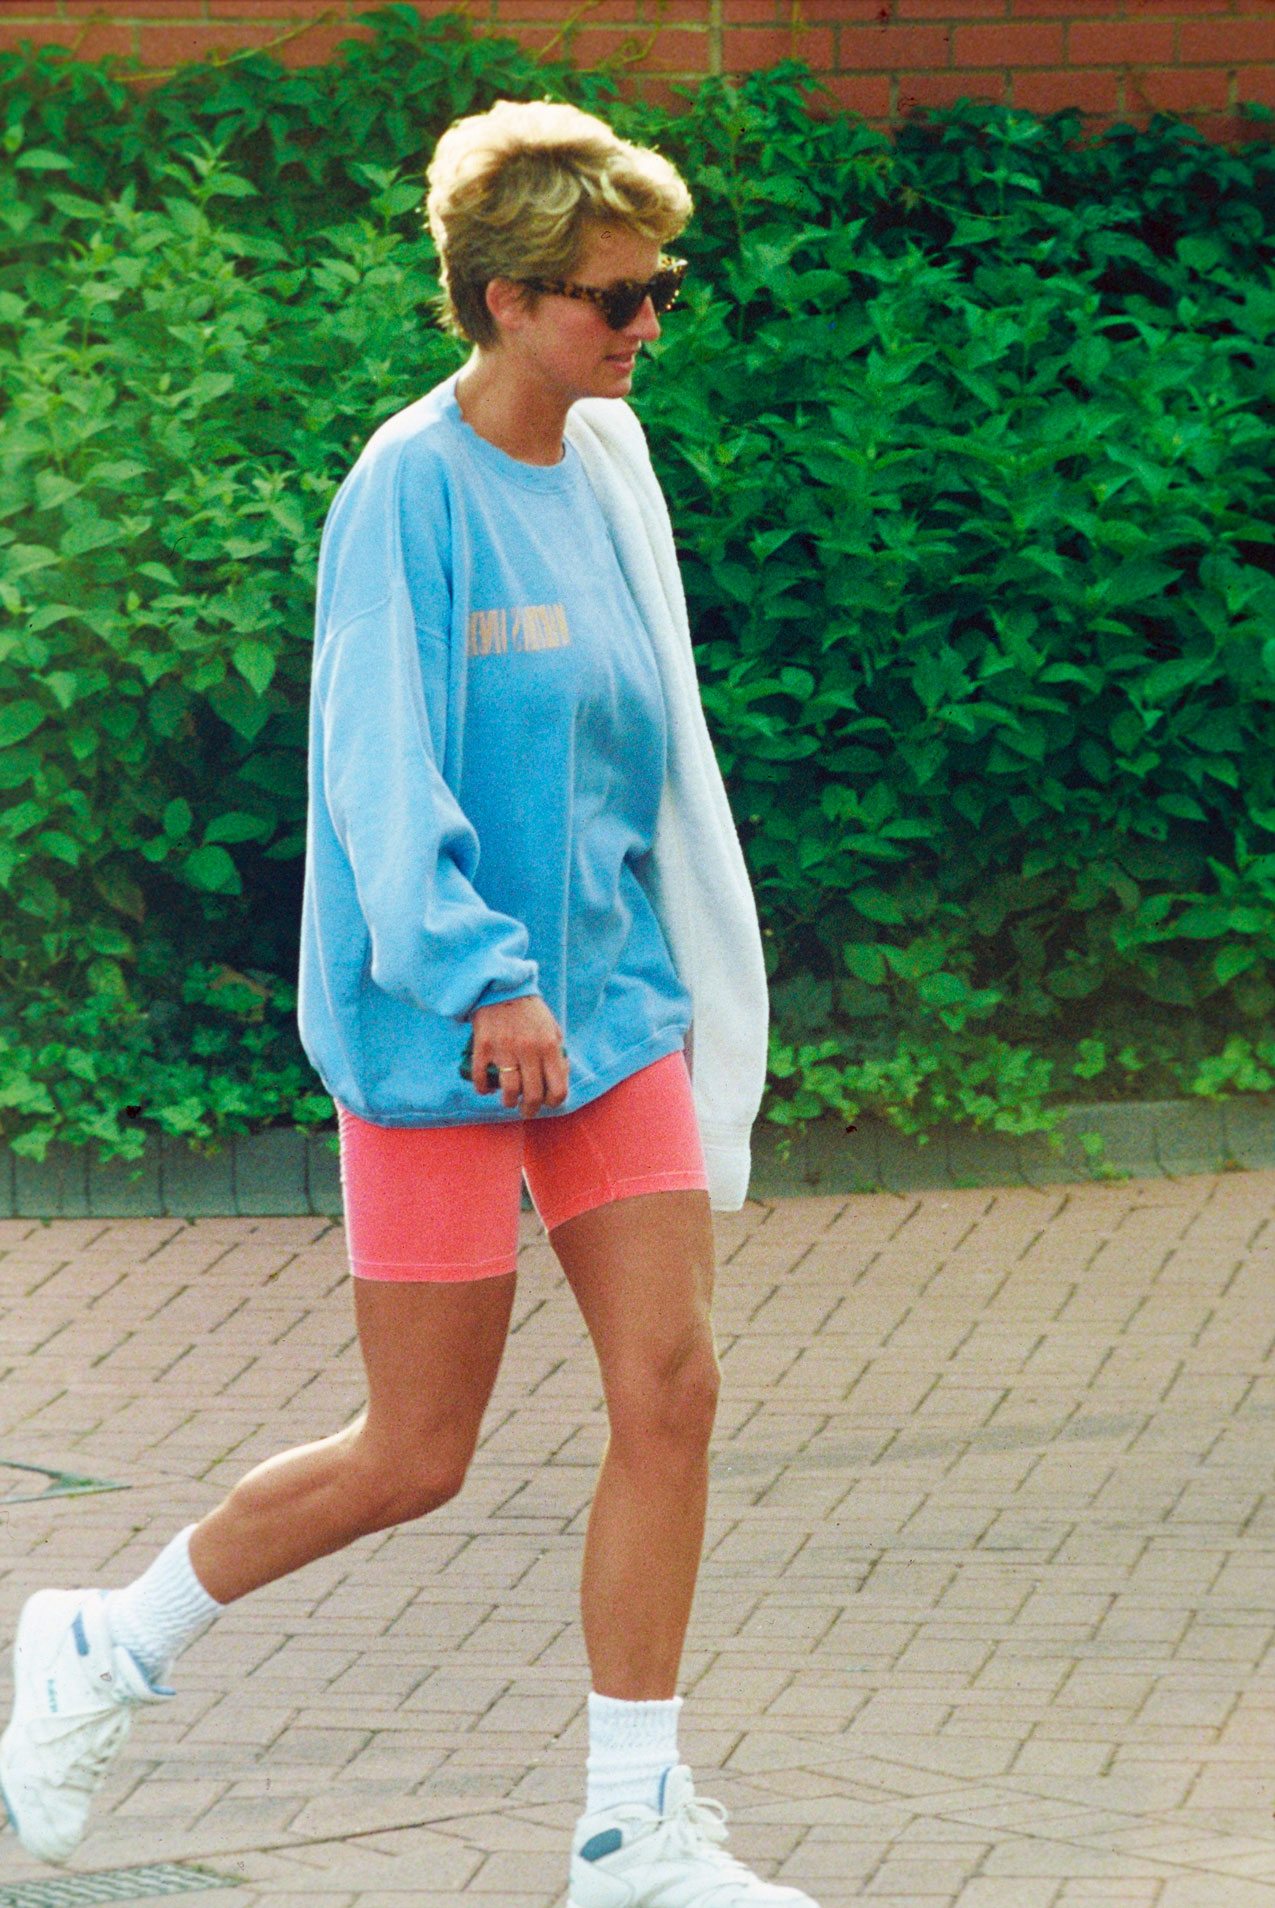 Princess Diana wearing one of her famous bike shorts in 1994. © Photo by Anwar Hussein/WireImage